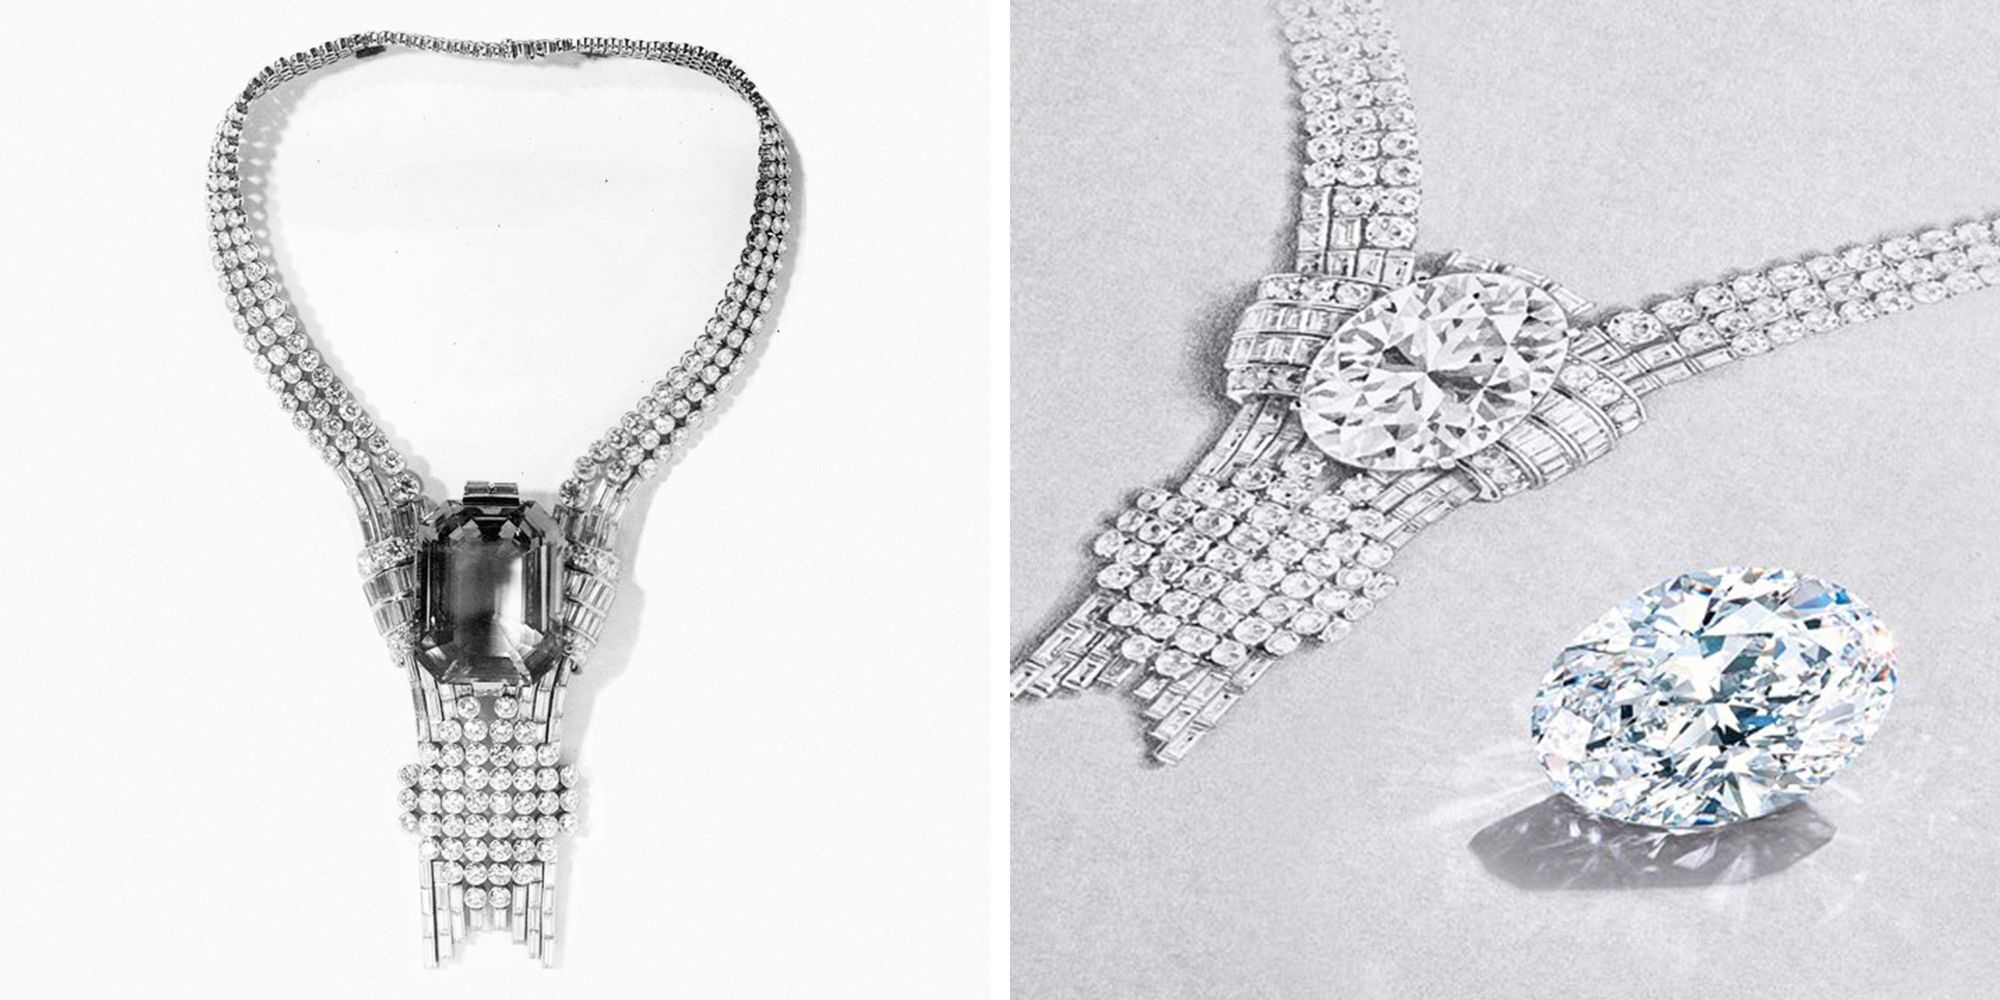 tiffany's most expensive necklace